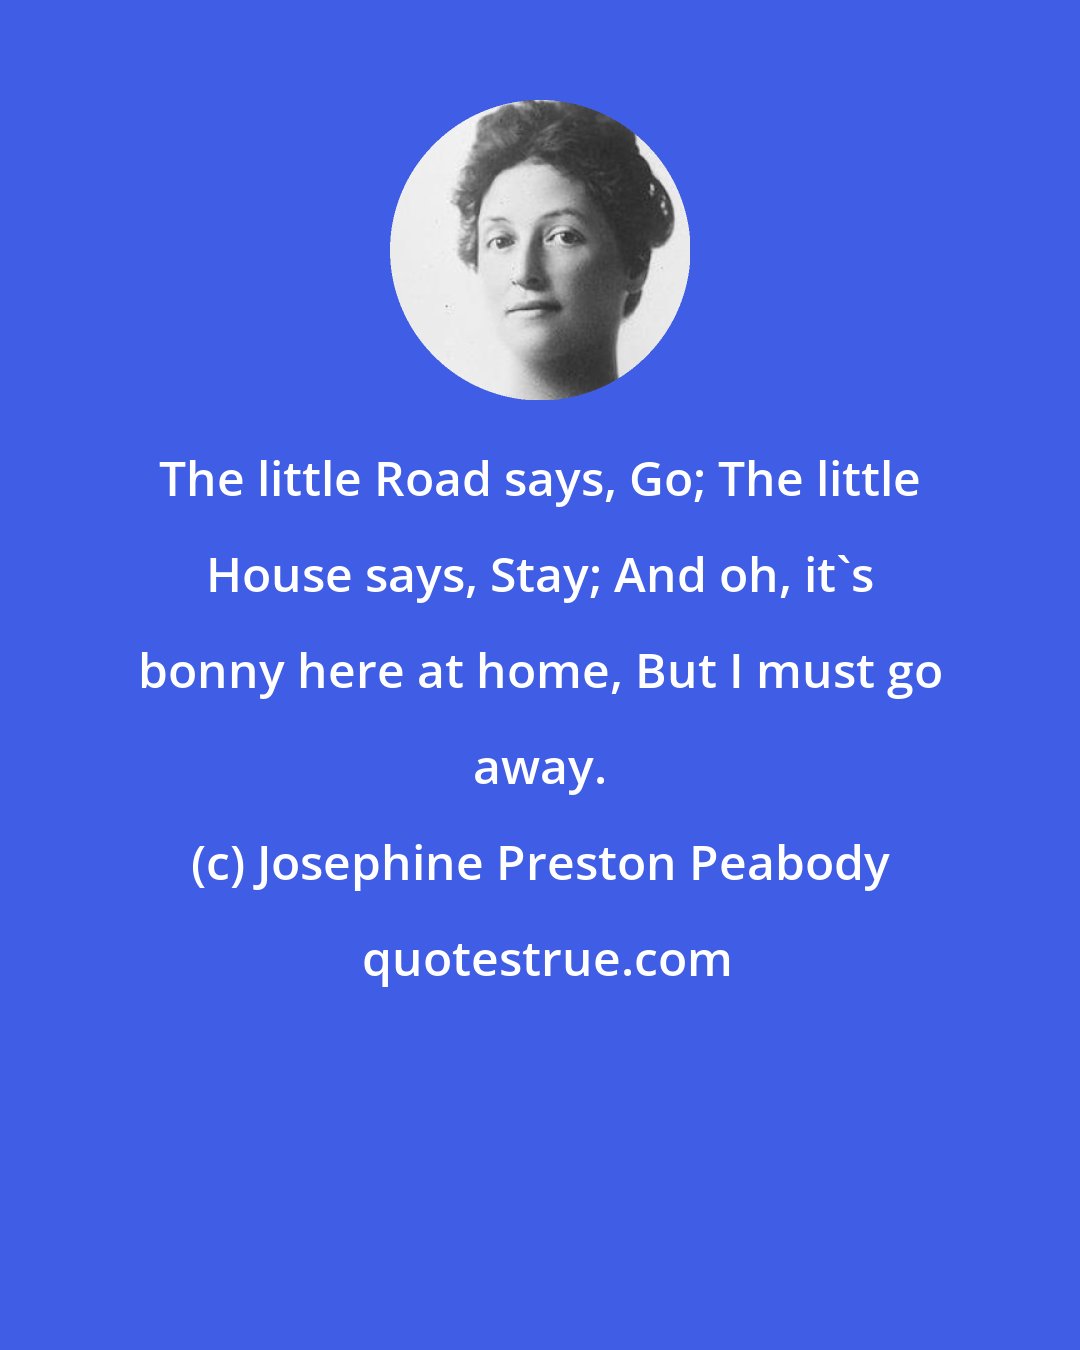 Josephine Preston Peabody: The little Road says, Go; The little House says, Stay; And oh, it's bonny here at home, But I must go away.